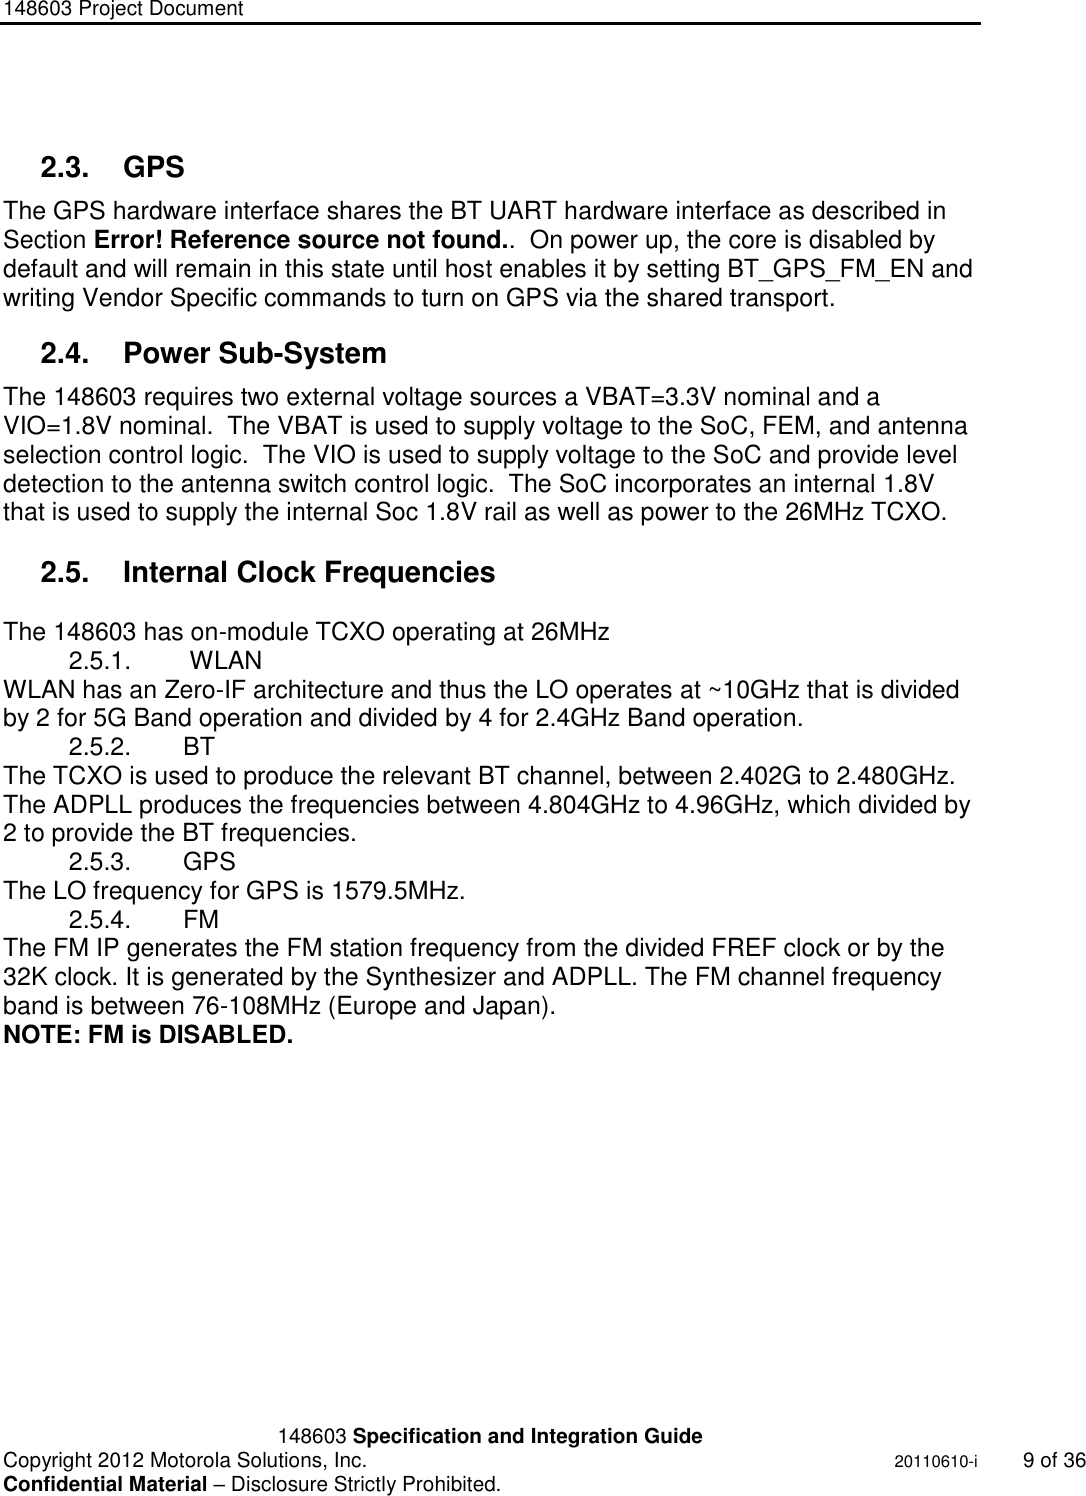 148603 Project Document       148603 Specification and Integration Guide  Copyright 2012 Motorola Solutions, Inc.    20110610-i  9 of 36 Confidential Material – Disclosure Strictly Prohibited. &quot;Ni ckel Leucochroic  Puffin&quot;  2.3.  GPS  The GPS hardware interface shares the BT UART hardware interface as described in Section Error! Reference source not found..  On power up, the core is disabled by default and will remain in this state until host enables it by setting BT_GPS_FM_EN and  writing Vendor Specific commands to turn on GPS via the shared transport. 2.4.  Power Sub-System The 148603 requires two external voltage sources a VBAT=3.3V nominal and a VIO=1.8V nominal.  The VBAT is used to supply voltage to the SoC, FEM, and antenna selection control logic.  The VIO is used to supply voltage to the SoC and provide level detection to the antenna switch control logic.  The SoC incorporates an internal 1.8V that is used to supply the internal Soc 1.8V rail as well as power to the 26MHz TCXO.  2.5.  Internal Clock Frequencies  The 148603 has on-module TCXO operating at 26MHz  2.5.1.   WLAN WLAN has an Zero-IF architecture and thus the LO operates at ~10GHz that is divided by 2 for 5G Band operation and divided by 4 for 2.4GHz Band operation. 2.5.2.  BT  The TCXO is used to produce the relevant BT channel, between 2.402G to 2.480GHz. The ADPLL produces the frequencies between 4.804GHz to 4.96GHz, which divided by 2 to provide the BT frequencies. 2.5.3.  GPS The LO frequency for GPS is 1579.5MHz. 2.5.4.  FM The FM IP generates the FM station frequency from the divided FREF clock or by the 32K clock. It is generated by the Synthesizer and ADPLL. The FM channel frequency band is between 76-108MHz (Europe and Japan). NOTE: FM is DISABLED.     